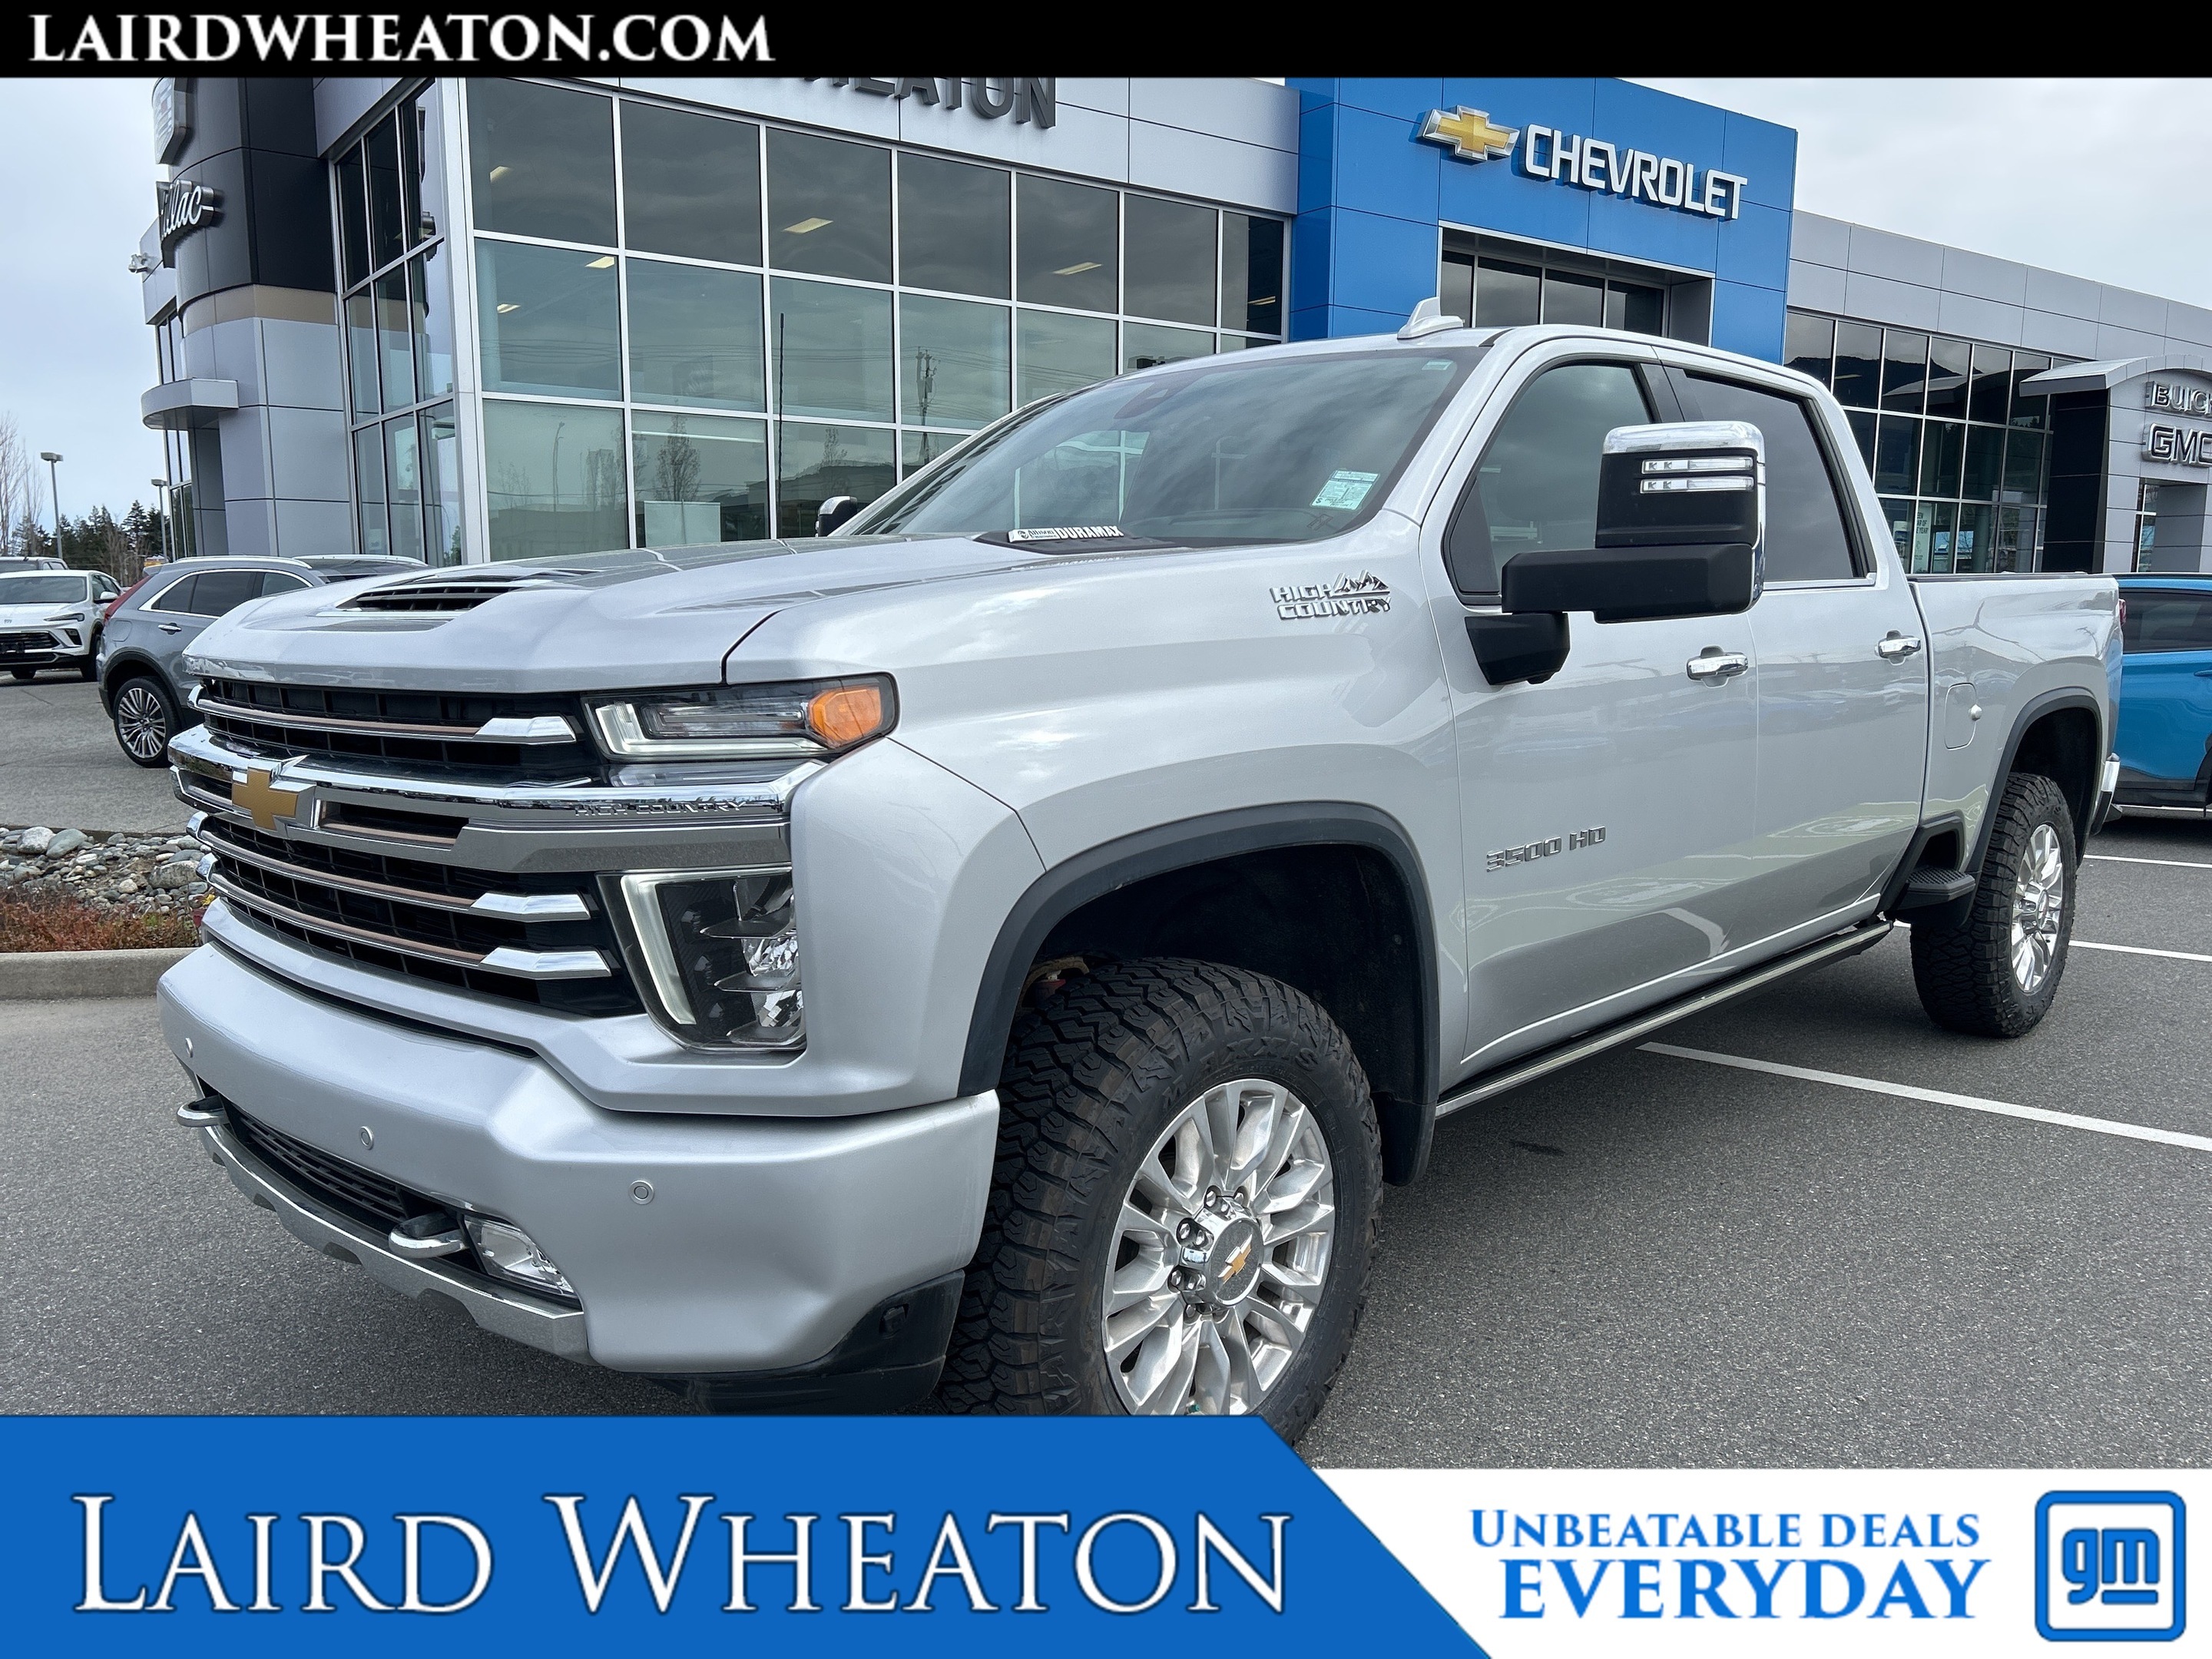 2022 Chevrolet SILVERADO 3500HD High Country 4X4, Diesel, Leather, Heated Seats